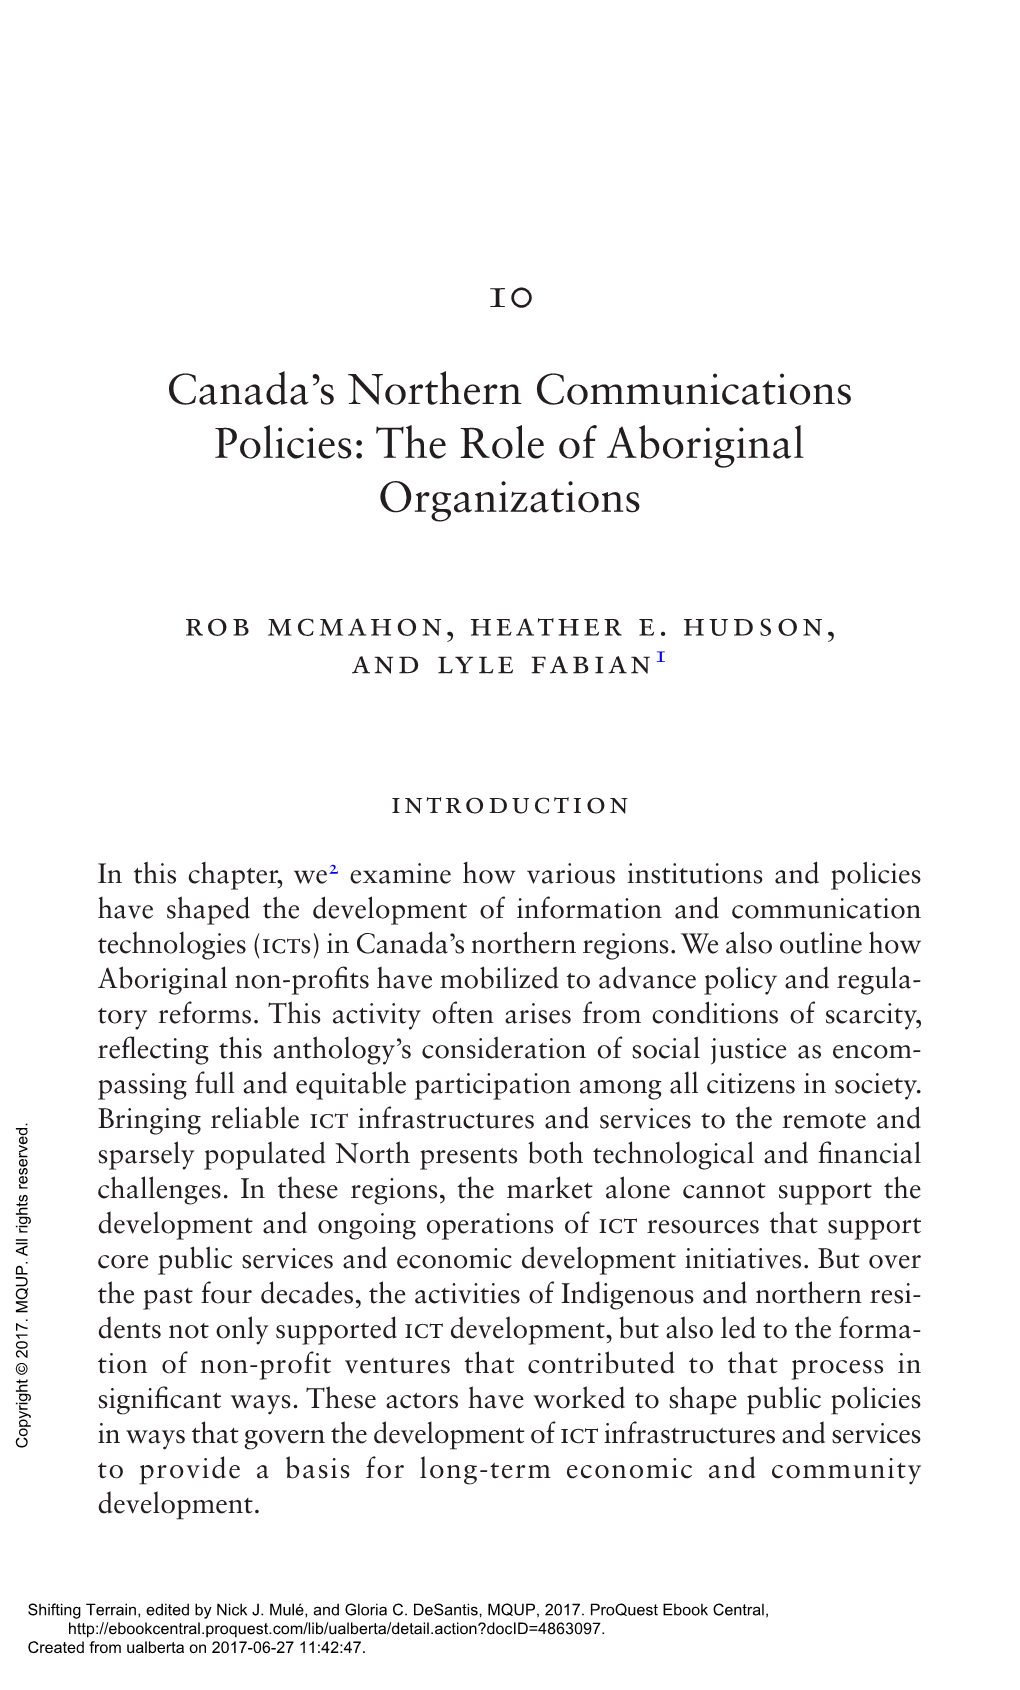 10 Canada's Northern Communications Policies: the Role